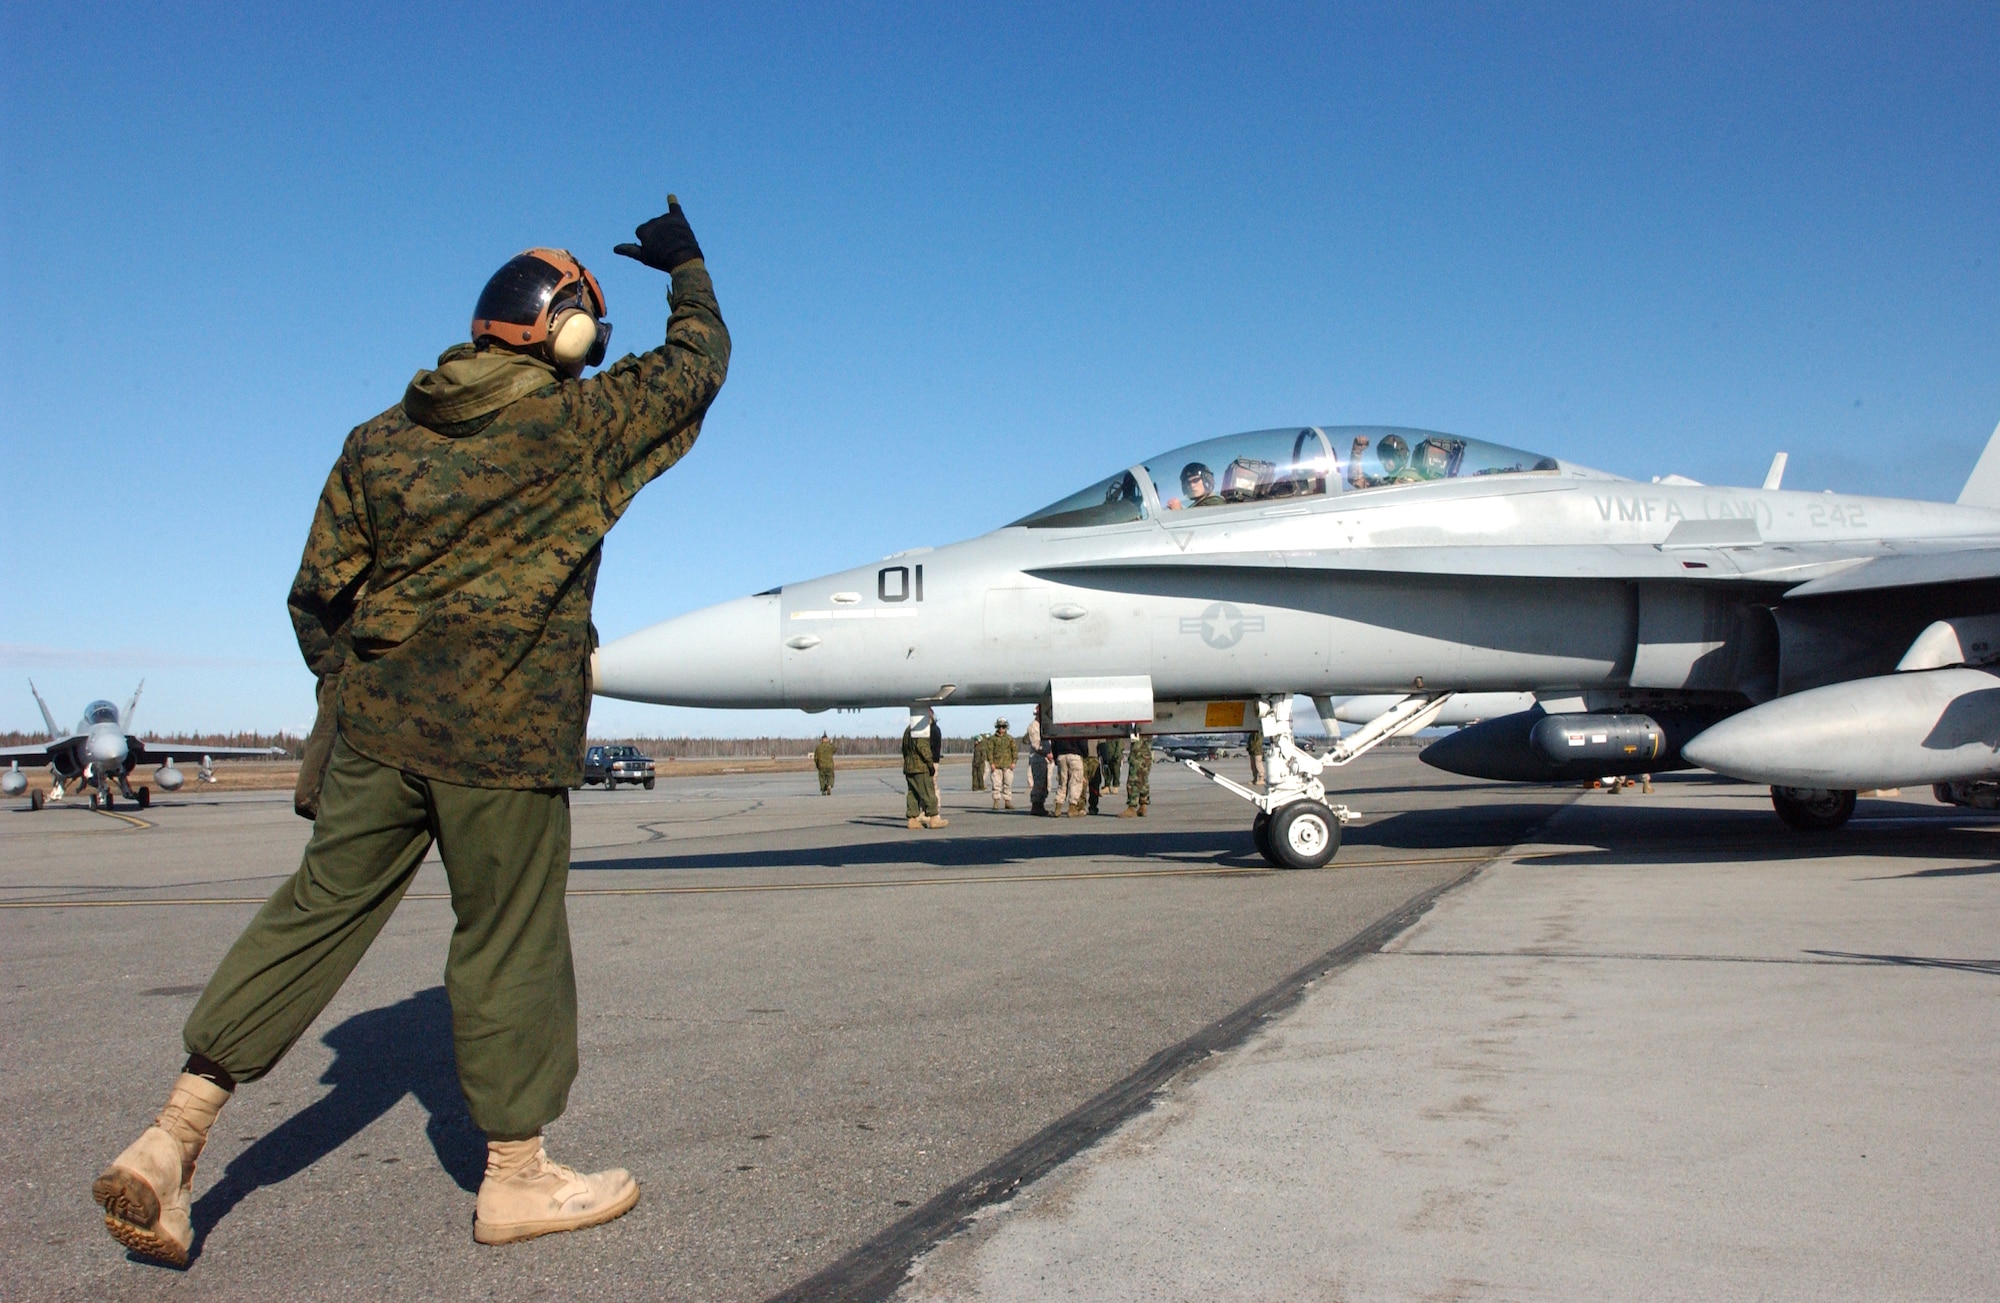 EIELSON AIR FORCE BASE, Alaska --  Lance Cpl. Alantheus Thompson, a plane captain with Marine Attack Squadron 242, tells his commanding officer to ‘Hang Loose’ before launching an F/A-18 on a training mission during Northern Edge ‘08 at Eielson AFB in Fairbanks, Alaska. VMFA (AW) 242 traveled from Iwakuni, Japan to participate in the two-week joint training exercise. Photo by Marine Sgt. Rocky Smith